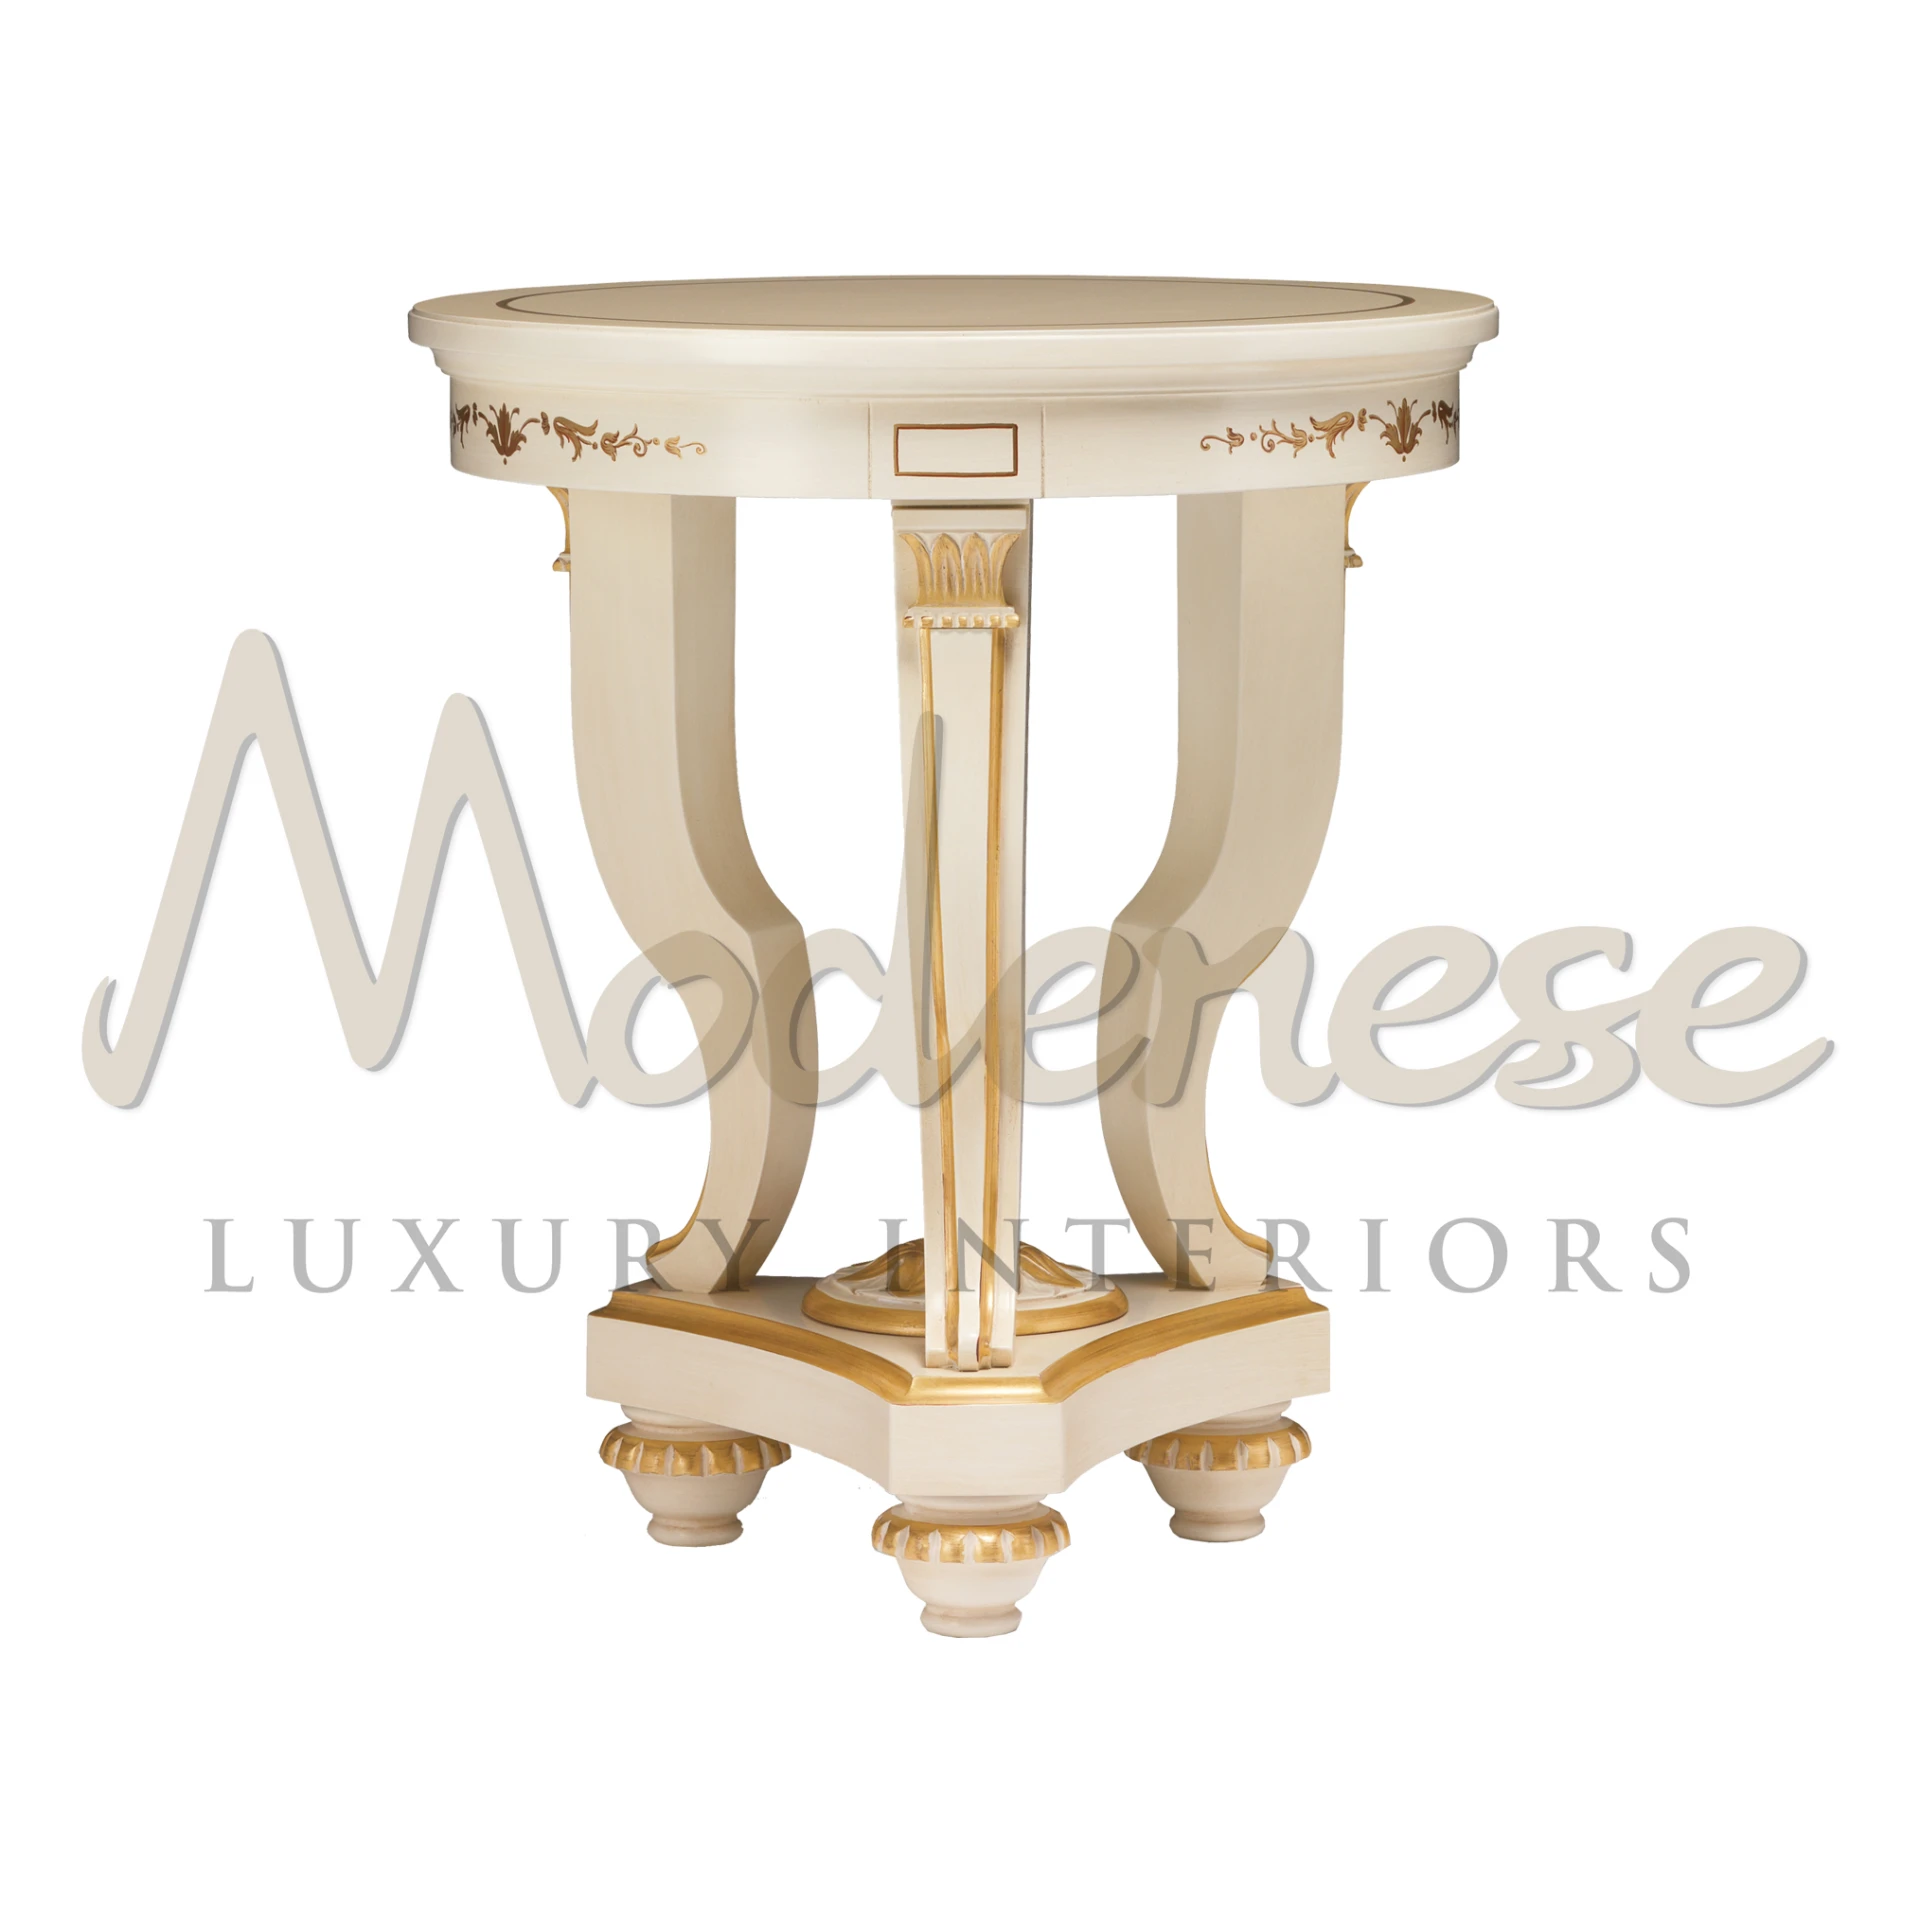 Luxurious Round Handmade Side Table by Modenese Interiors, offering custom finishes like gold leaf and venetian lacquered for elegant spaces.